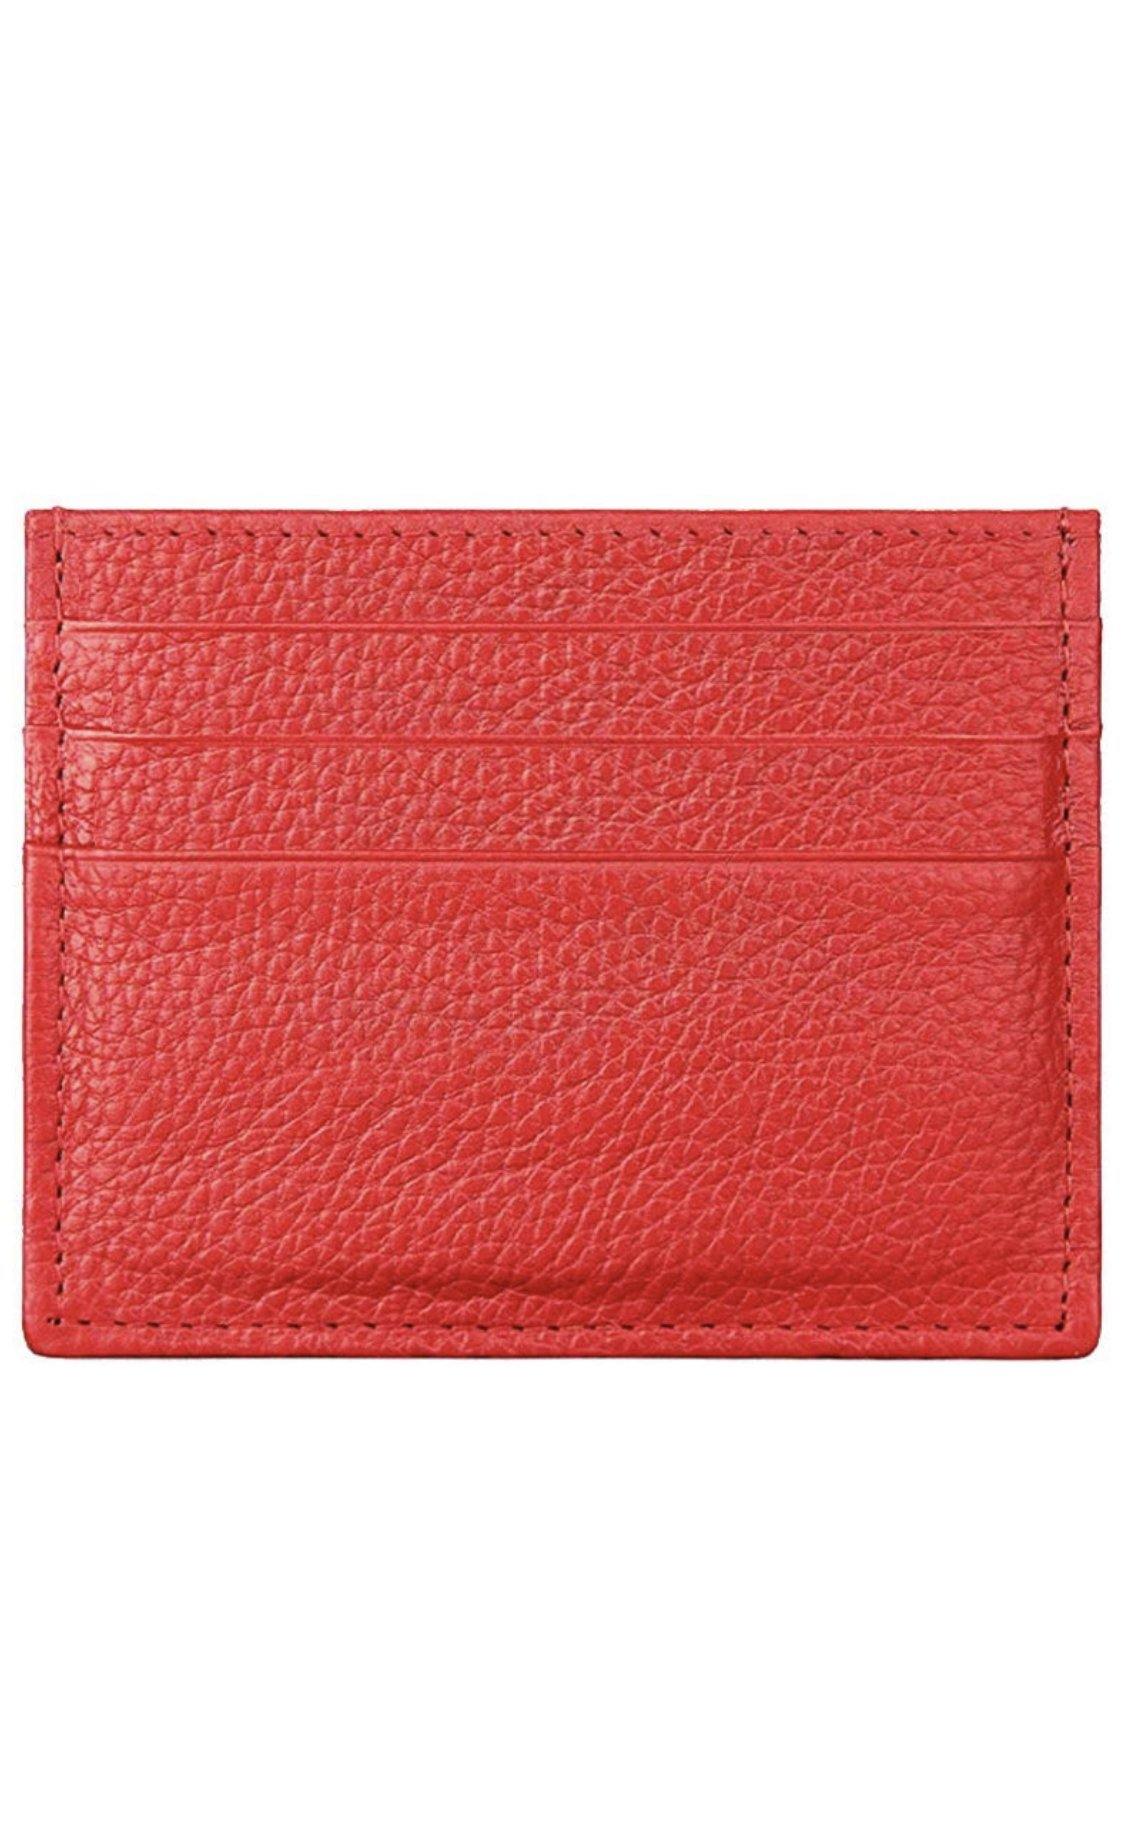 Leather business and credit card holder/wallet personalised with your name or initials - PersonalisebyLisa